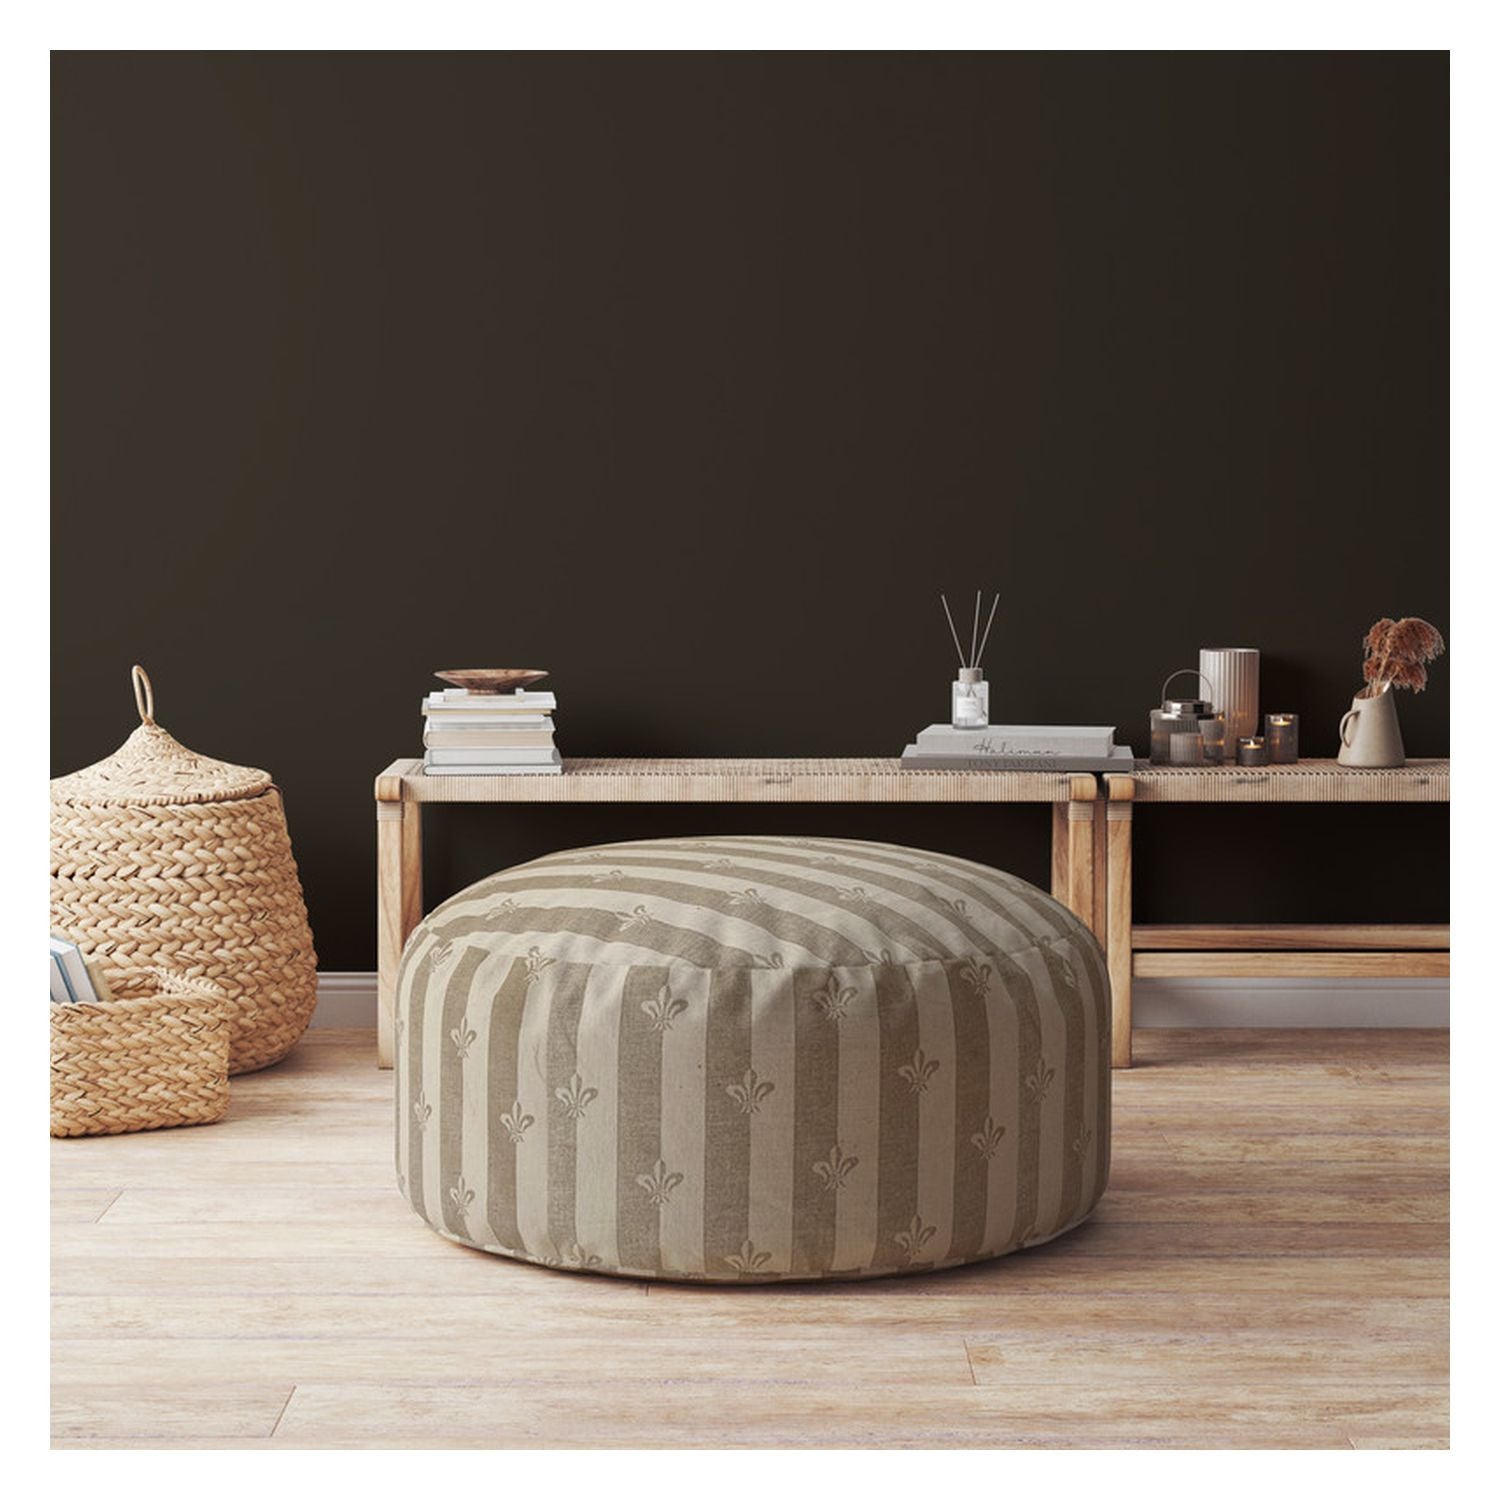 24" Taupe Flax Round Floral Pouf Cover